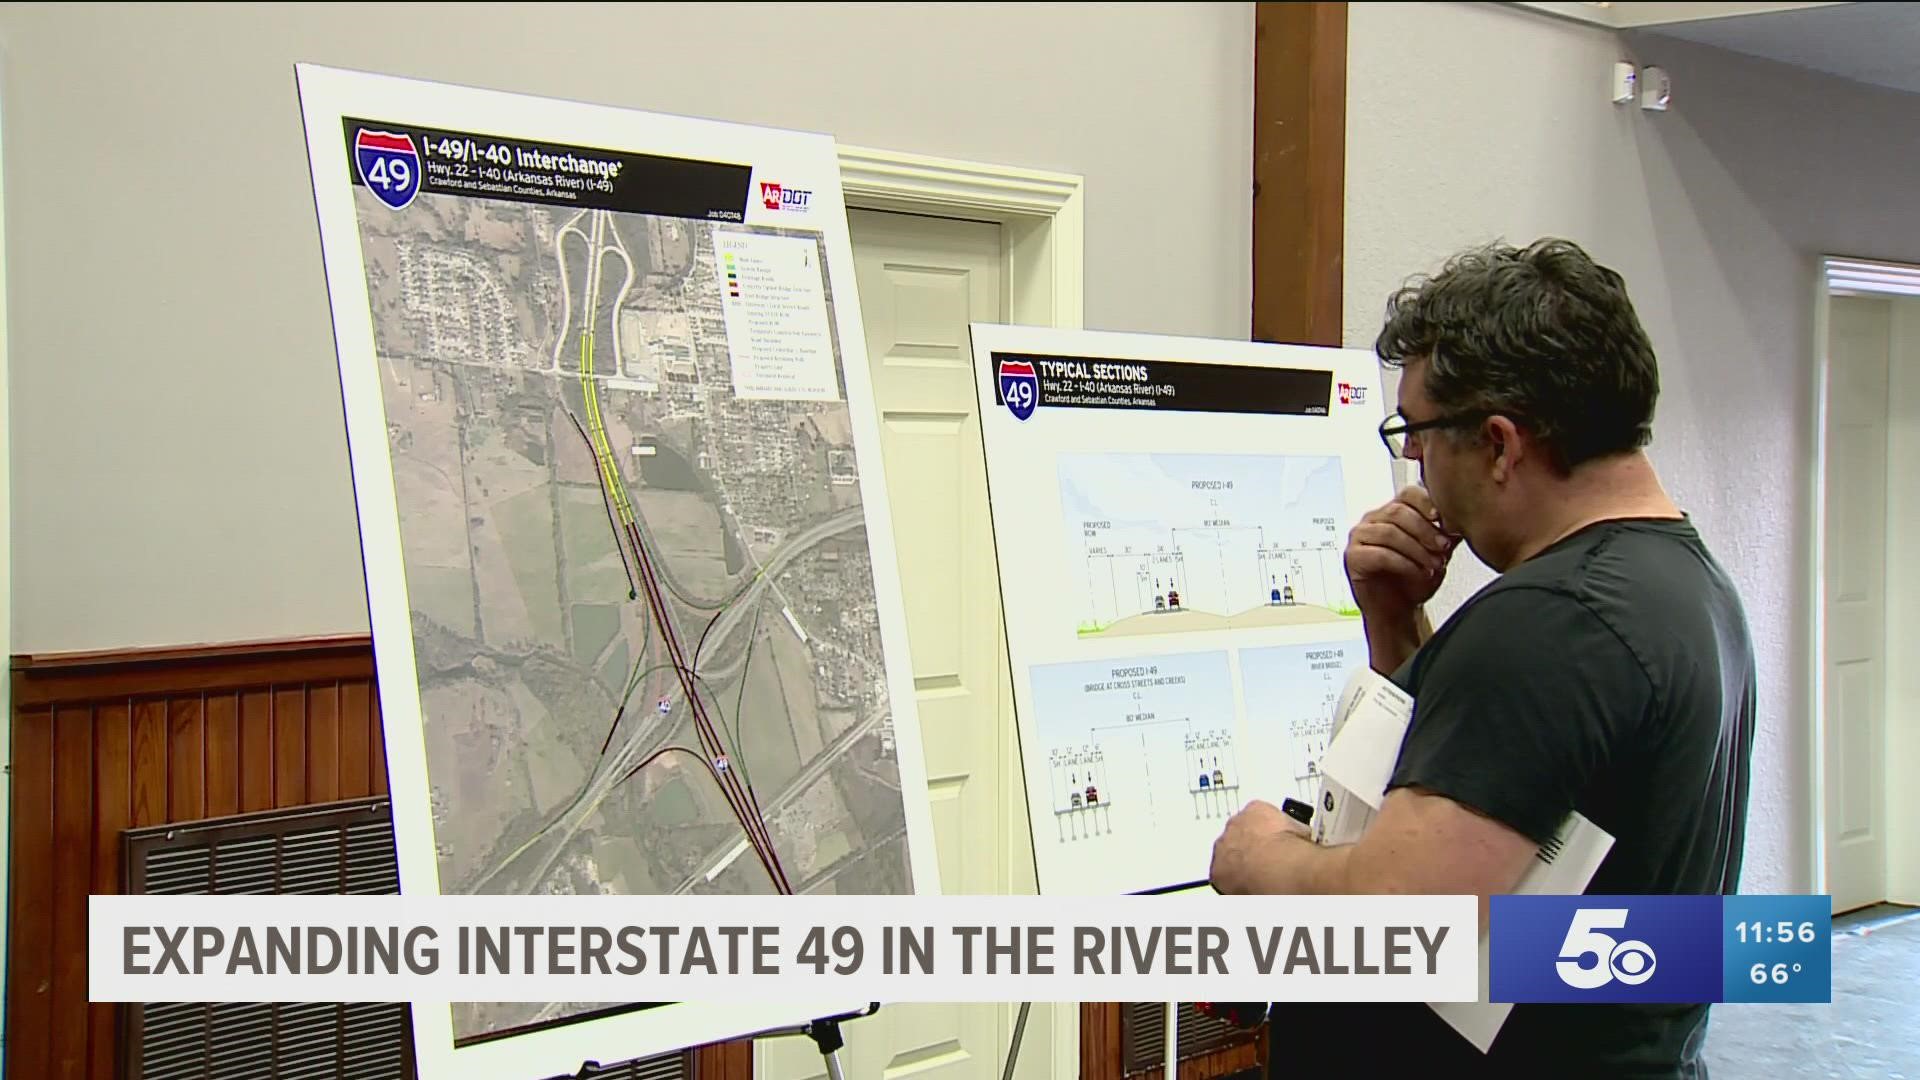 ARDOT held a public input meeting about expanding Interstate 49 in the River Valley